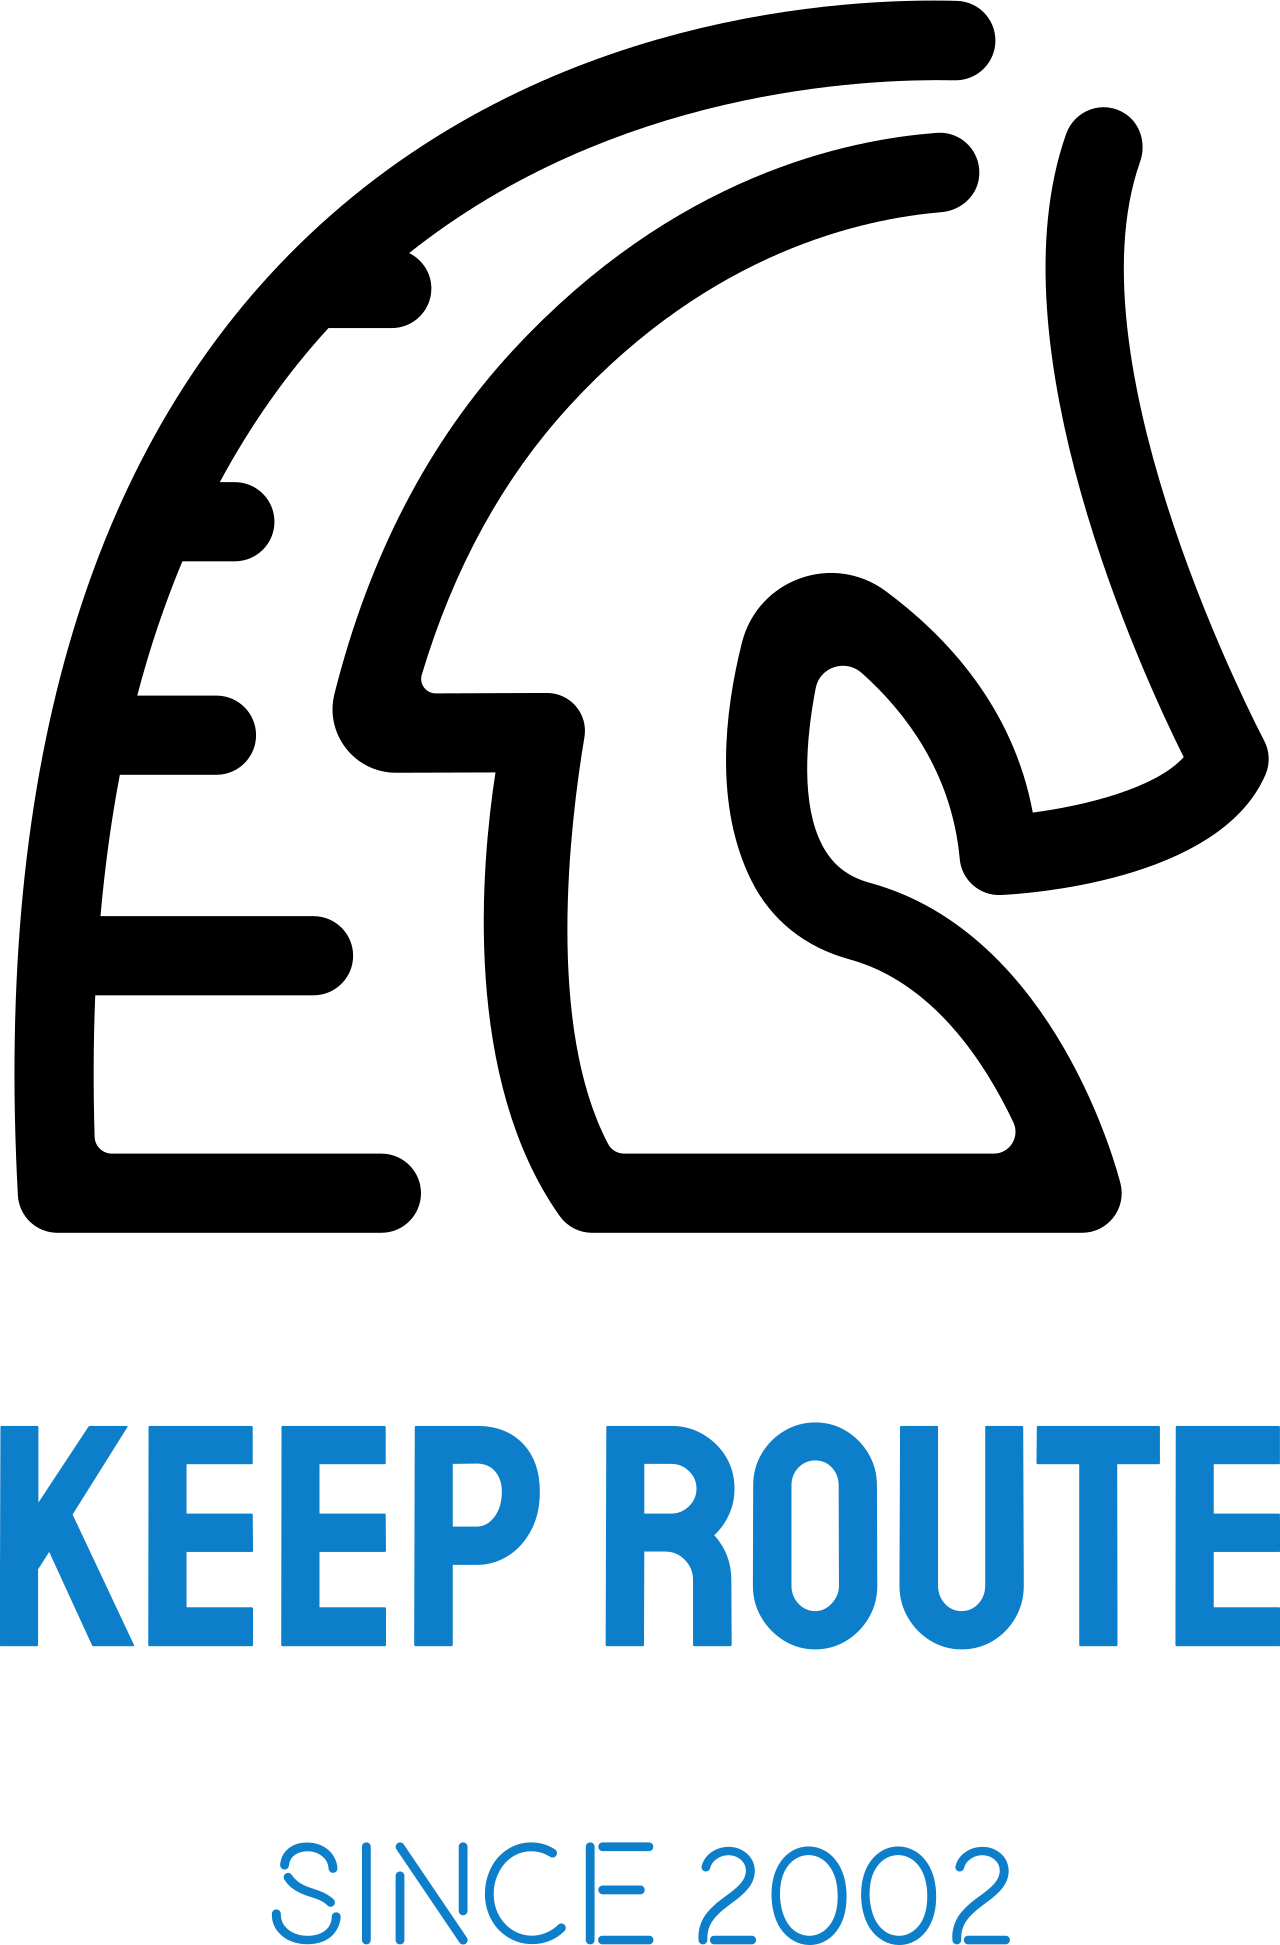 KEEP ROUTE's web page